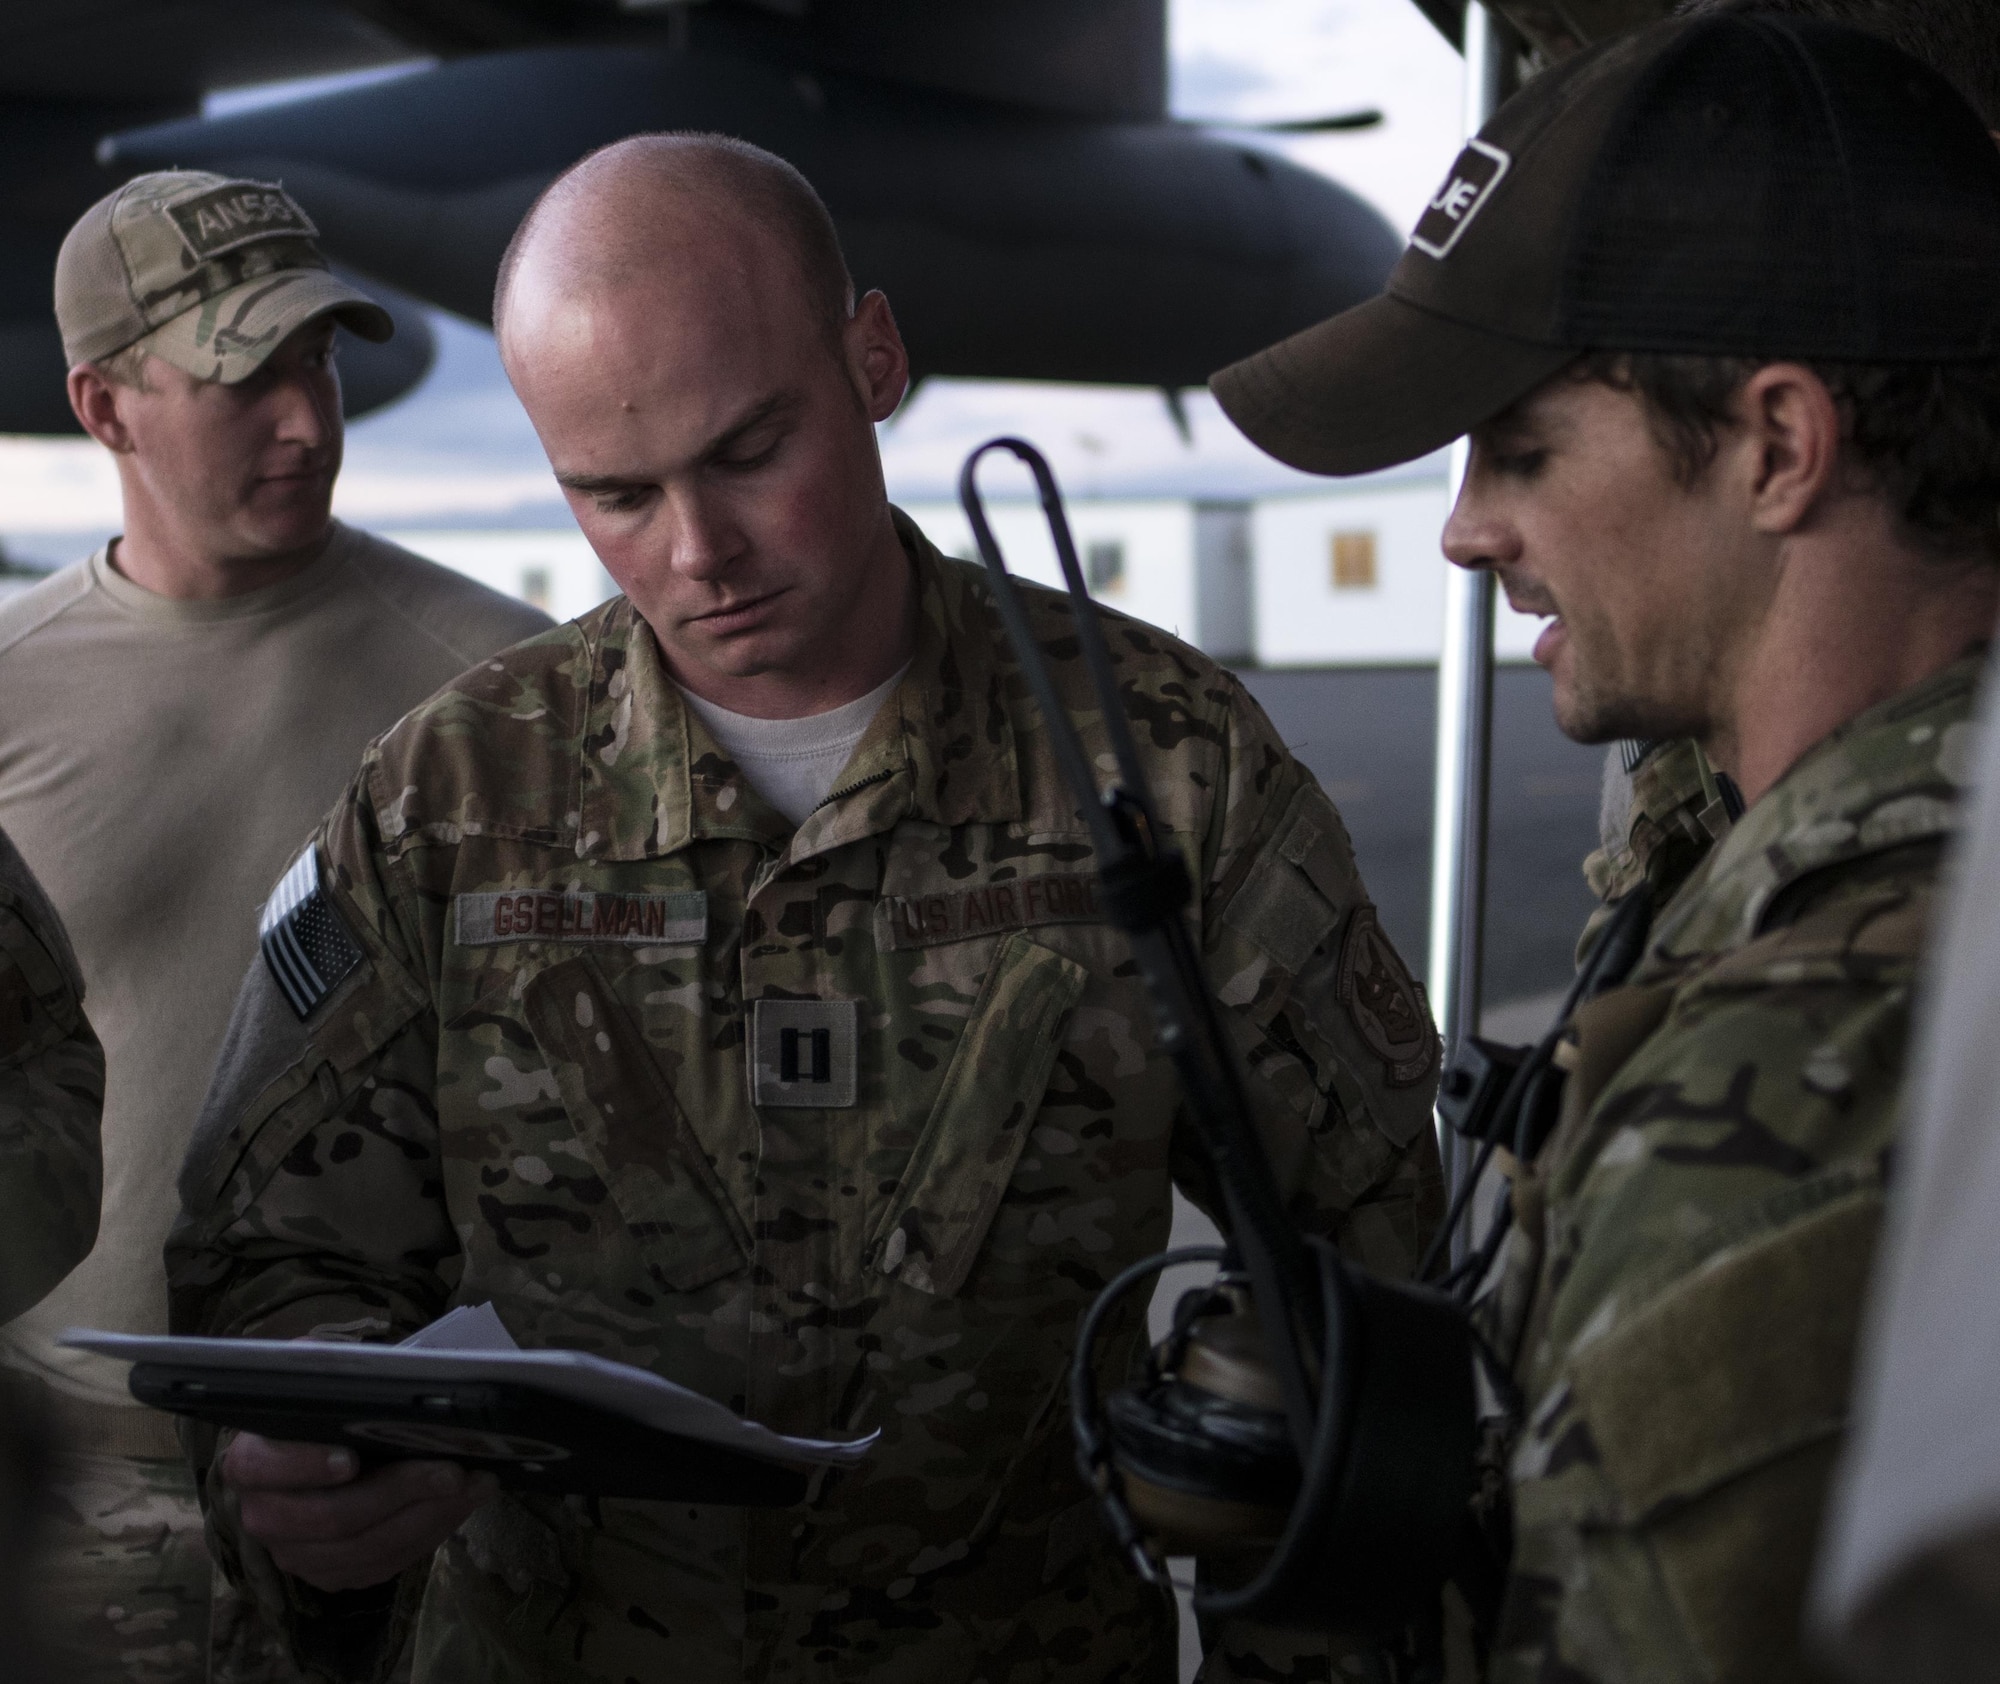 A U.S. Air Force 17th Special Operations Squadron MC-130J Commando II aircraft commander and 320th Special Tactics Squadron jumpmaster discuss the parameters for high altitude, high opening (HAHO) jump operations July 11, 2017, at Rockhampton, Australia during Talisman Saber 2017. Experts in specialized aviation, the 17th SOS executed complex personnel and cargo airdrops, low-level flying operations and dissimilar formation flights with 37th Squadron Royal Australian Air Force and 40th Squadron Royal New Zealand Air Force throughout the exercise. (U.S. Air Force photo by Capt. Jessica Tait)